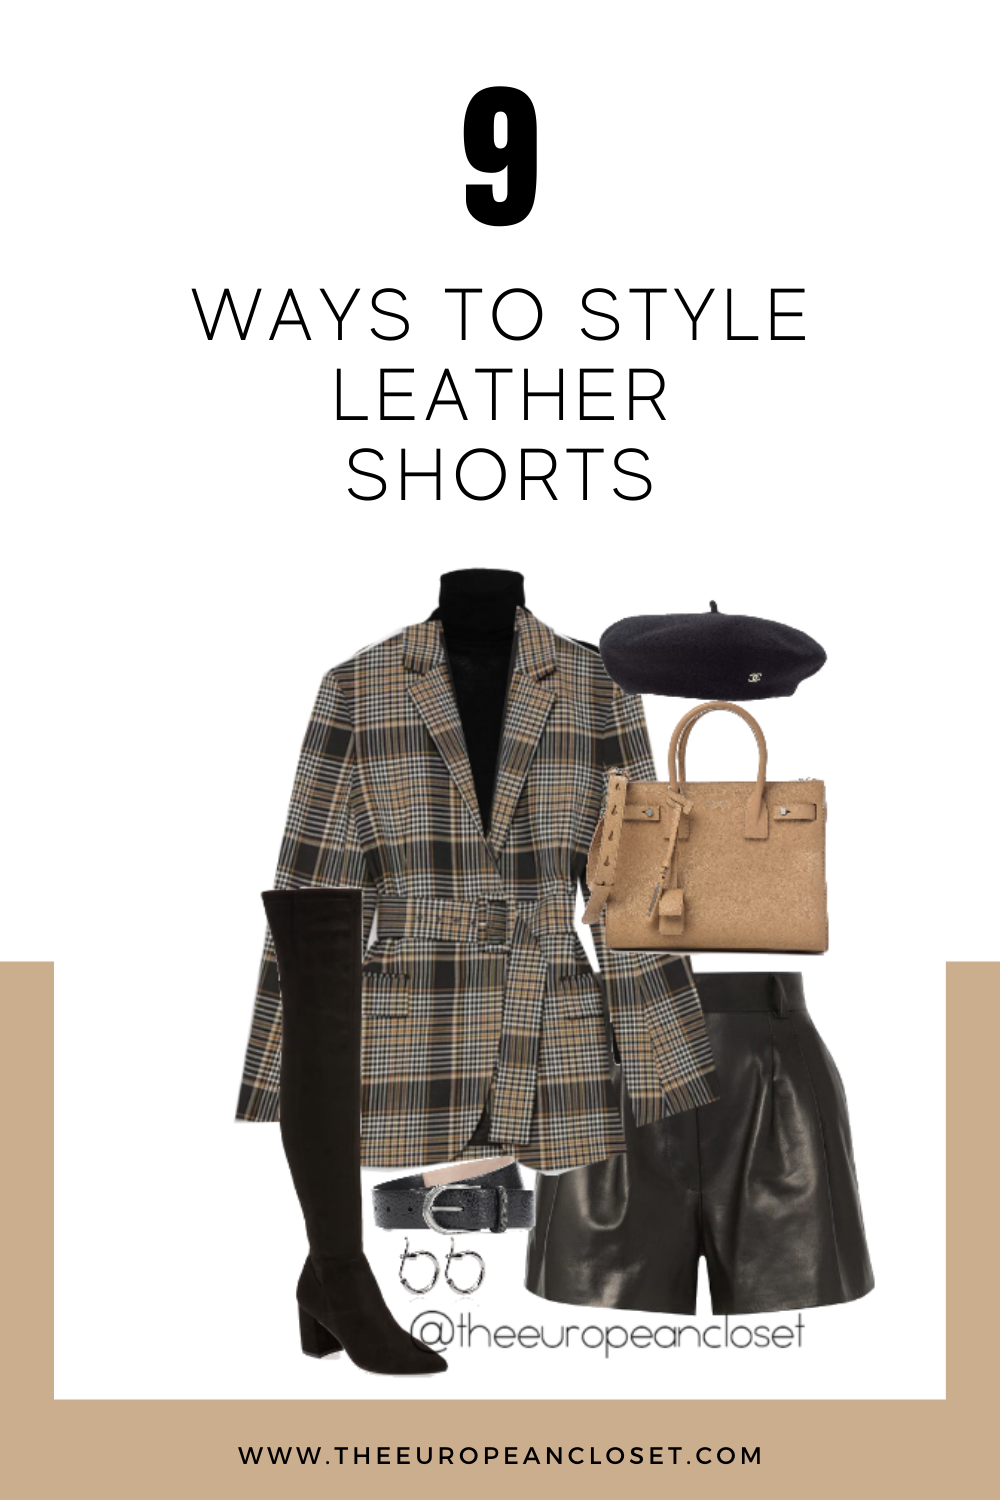 In today's post, I'm showing you 9 ways you can style leather shorts. They can be worn anywhere which makes them a great wardrobe staple!